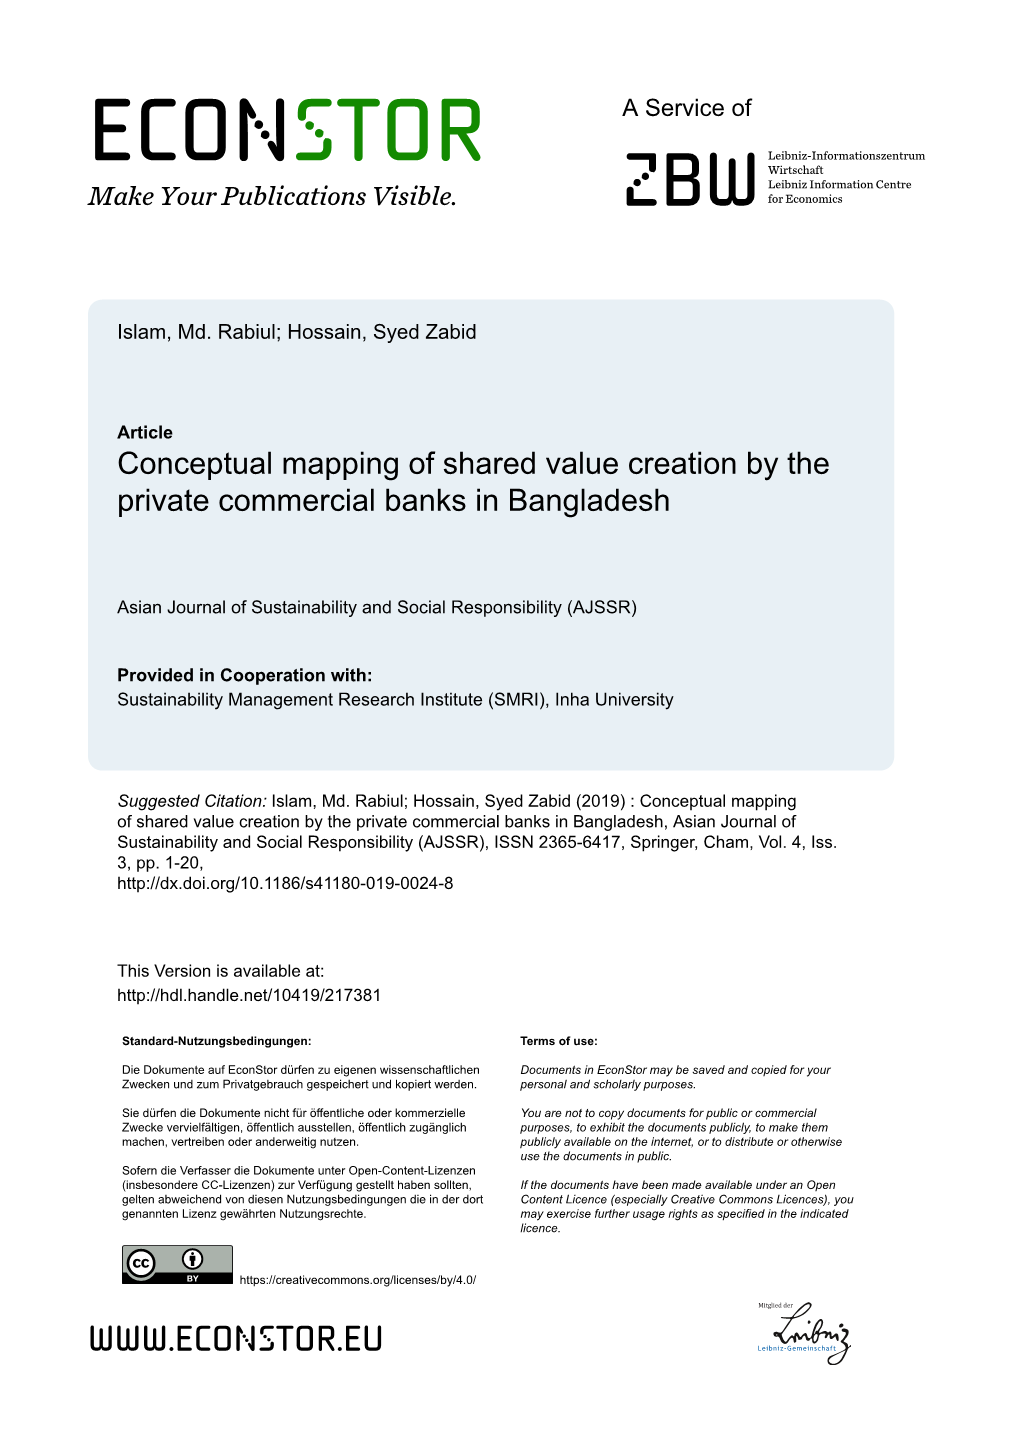 Conceptual Mapping of Shared Value Creation by the Private Commercial Banks in Bangladesh